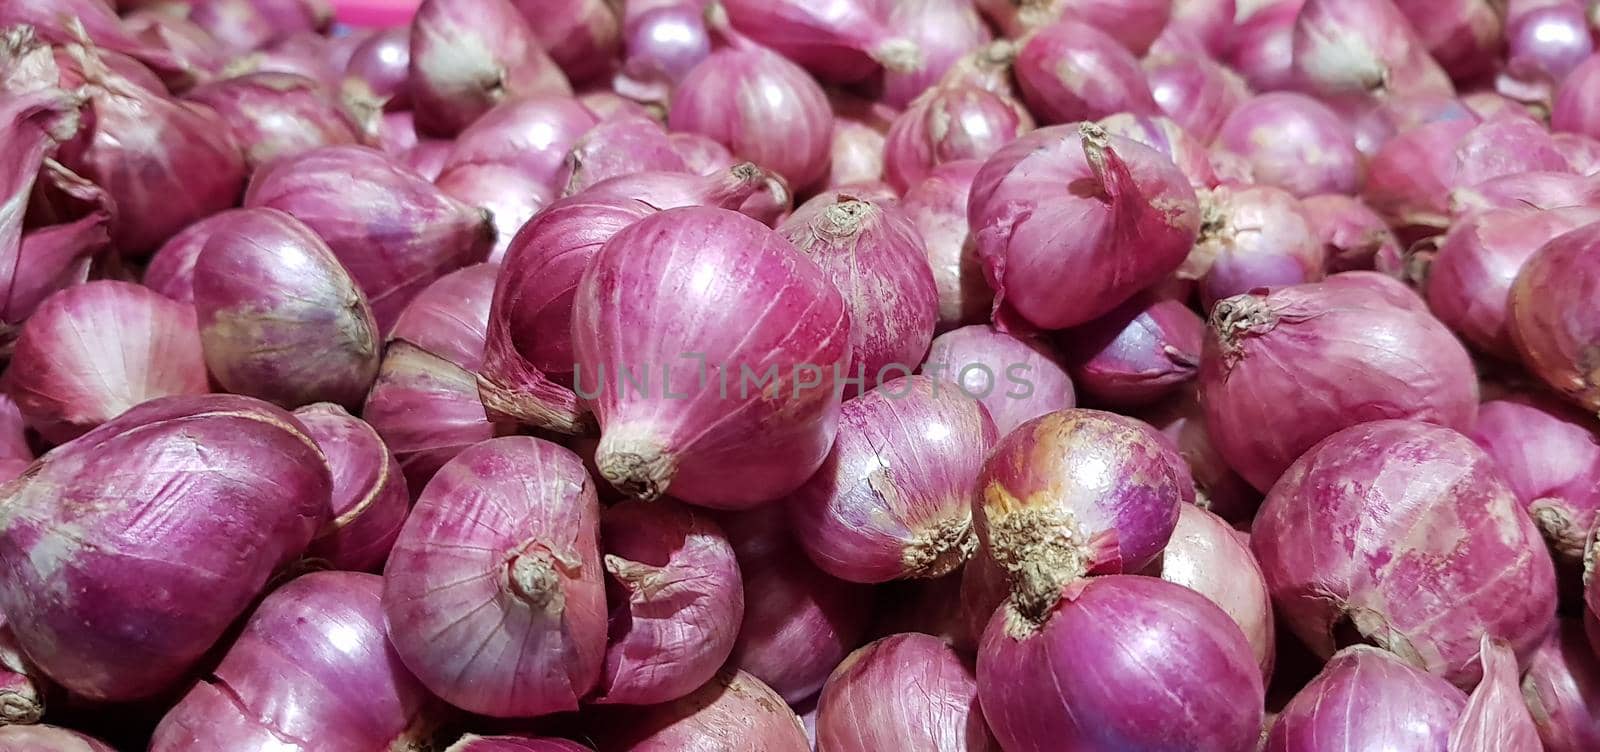 Group of Shallots onion Fresh purple shallots or Allium cepa, close up picture in the market